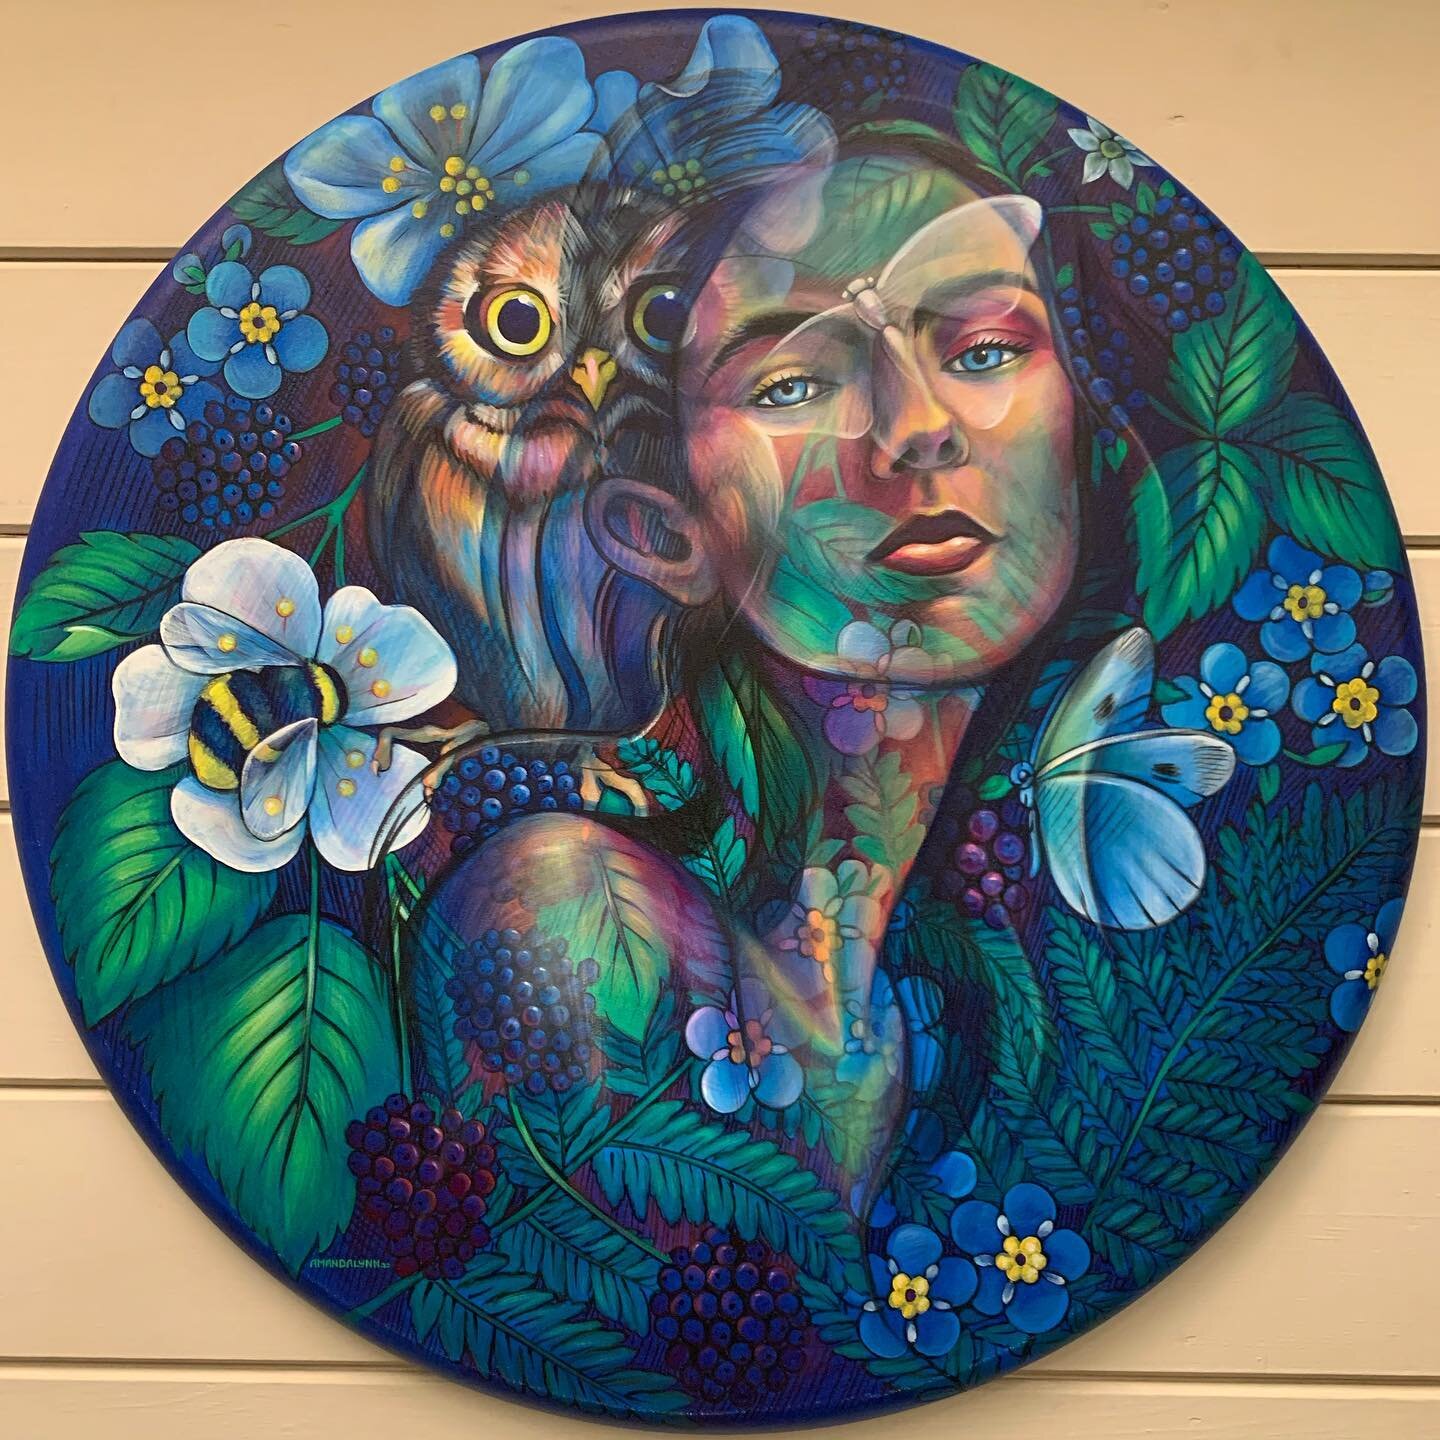 The best part about making your own art, is you can change your mind and decide to finish things a different way. Think this piece feels complete now. &lsquo;Linger On&rsquo;, 36&rdquo; diameter, acrylic on canvas, will be on display at my solo exhib